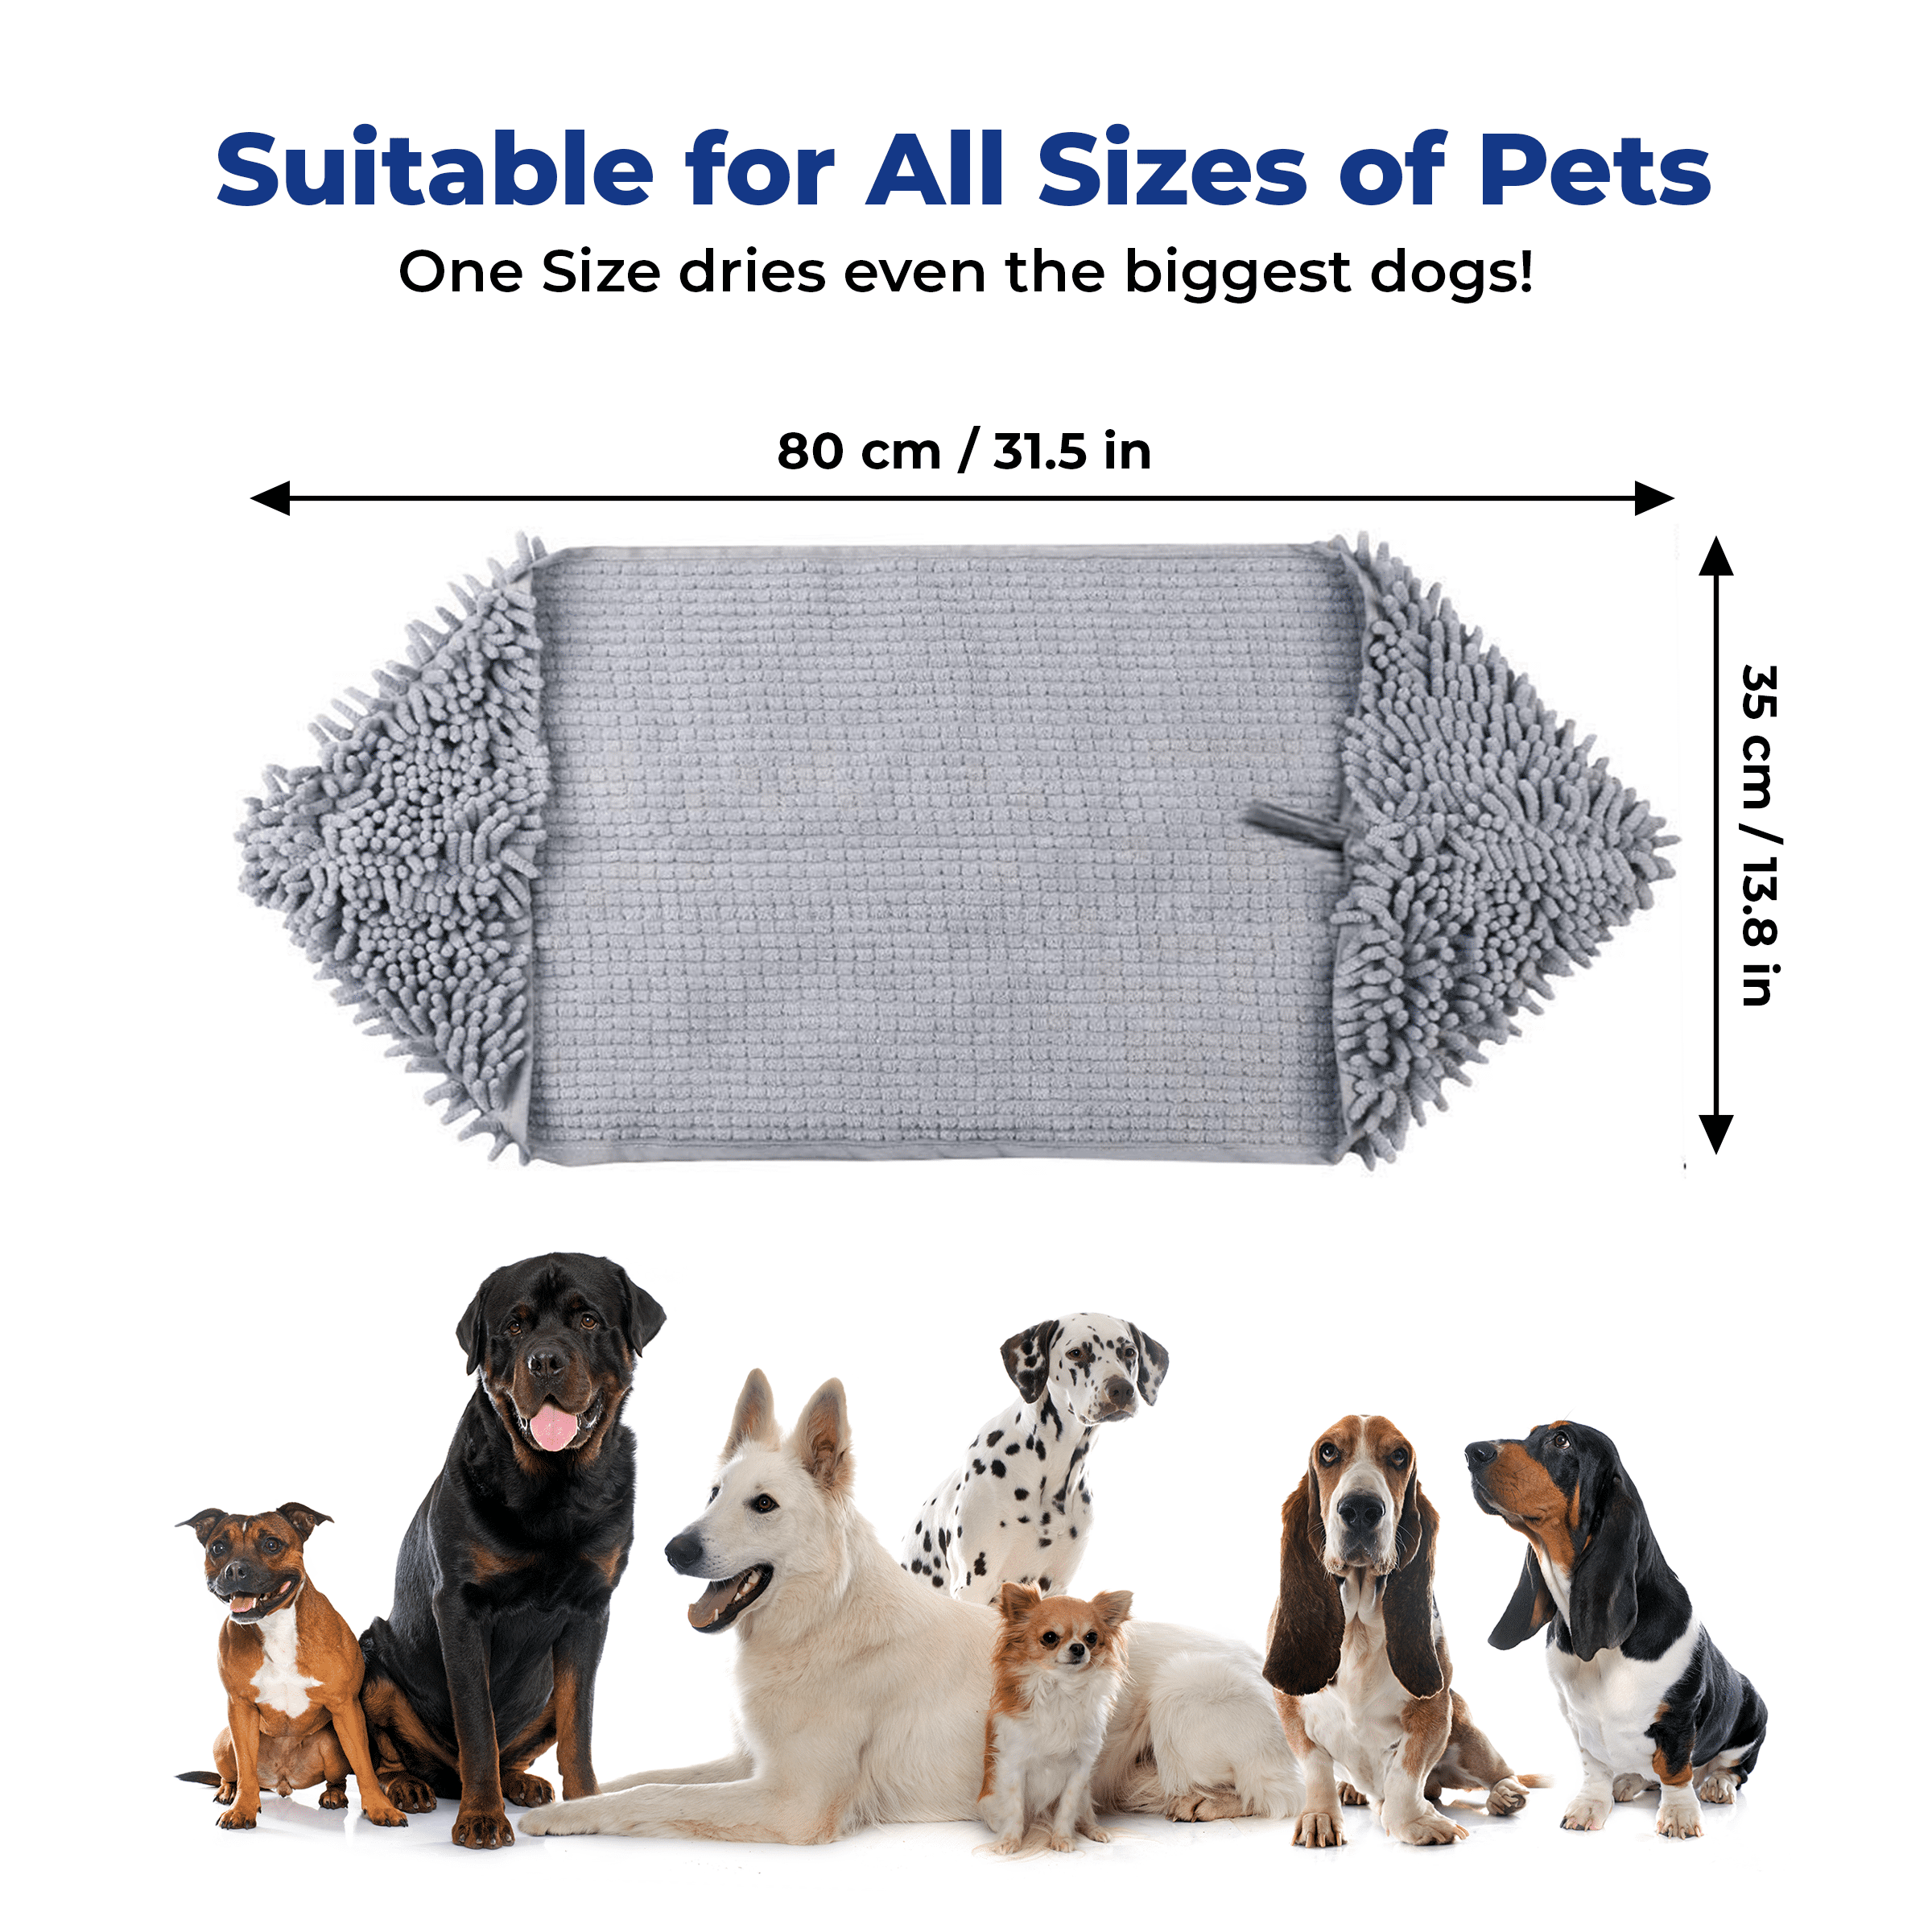 Pickle & Polly - Medium Microfiber Chenille Mat/Rug for Dogs & Cats - Super Absorbent, Odor-Resistant, Ultra-Fast Drying Pet Mat - Stylish, Durable